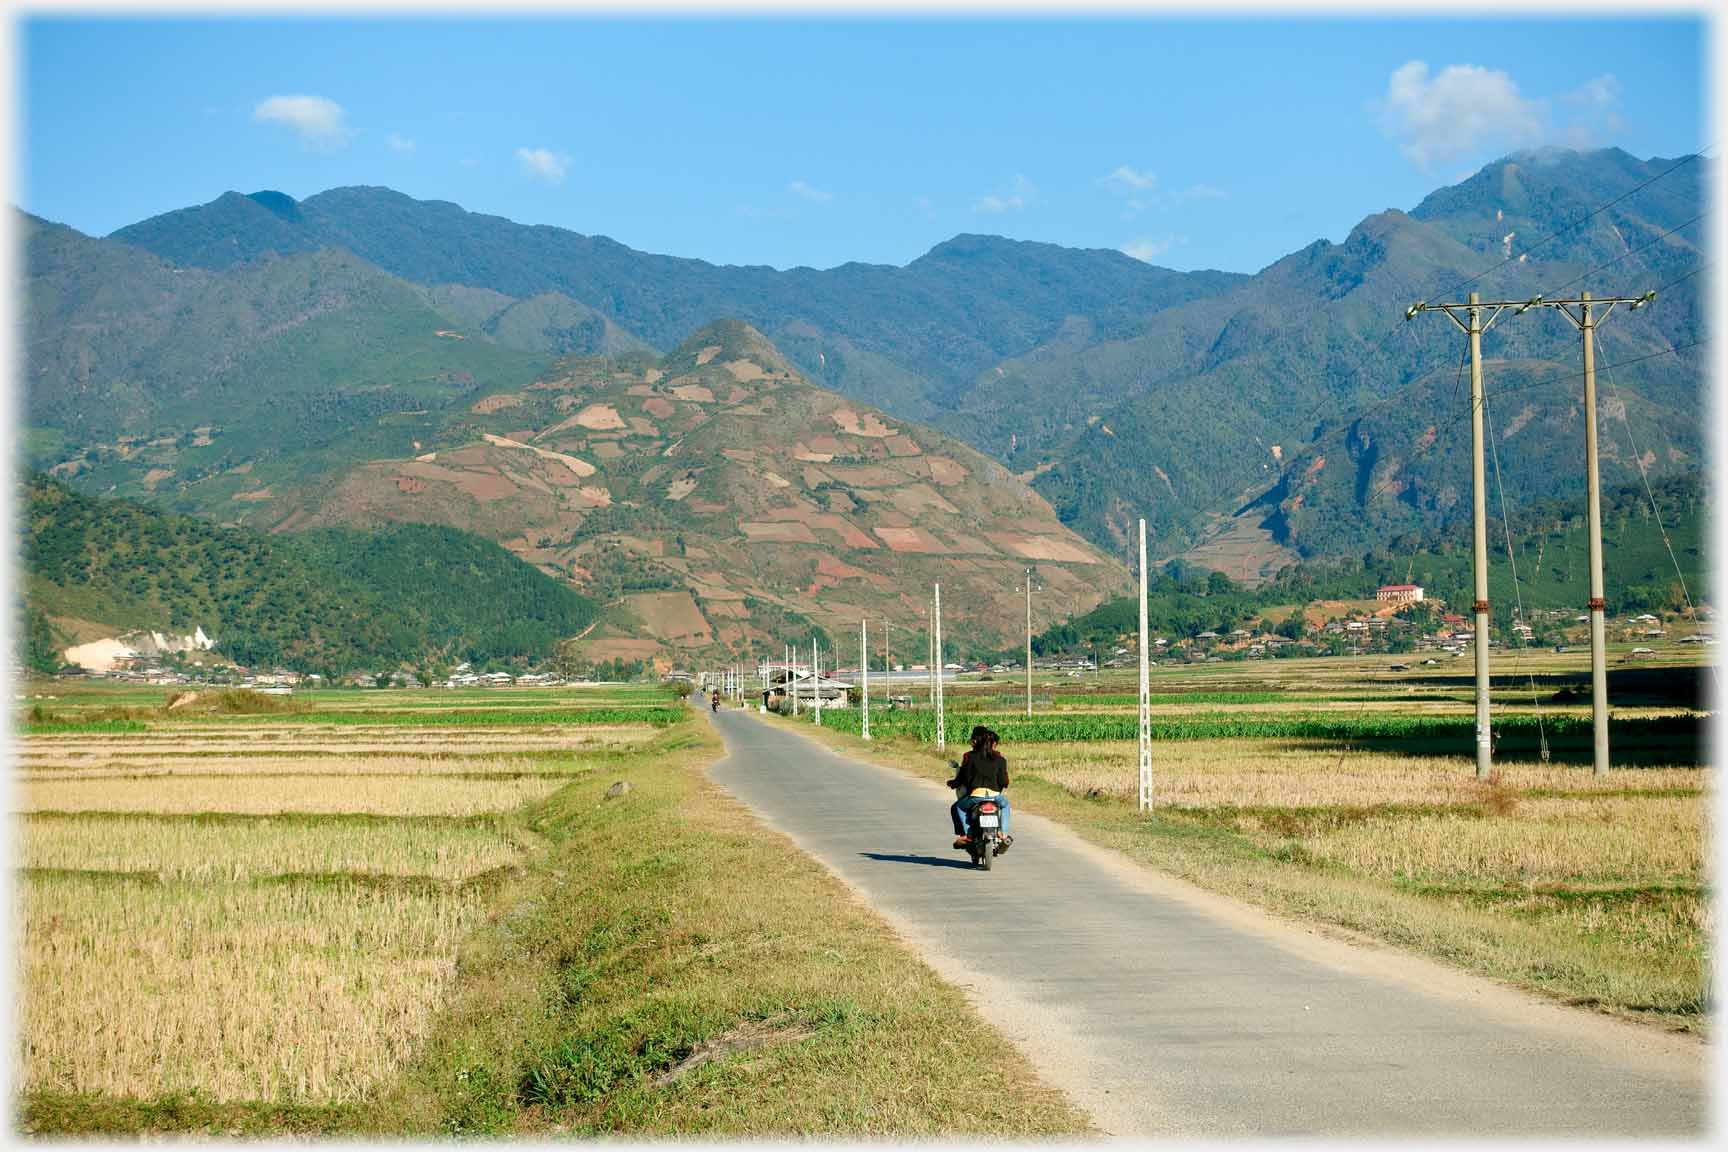 Small straight road leading towards hills, motorcycle on it.